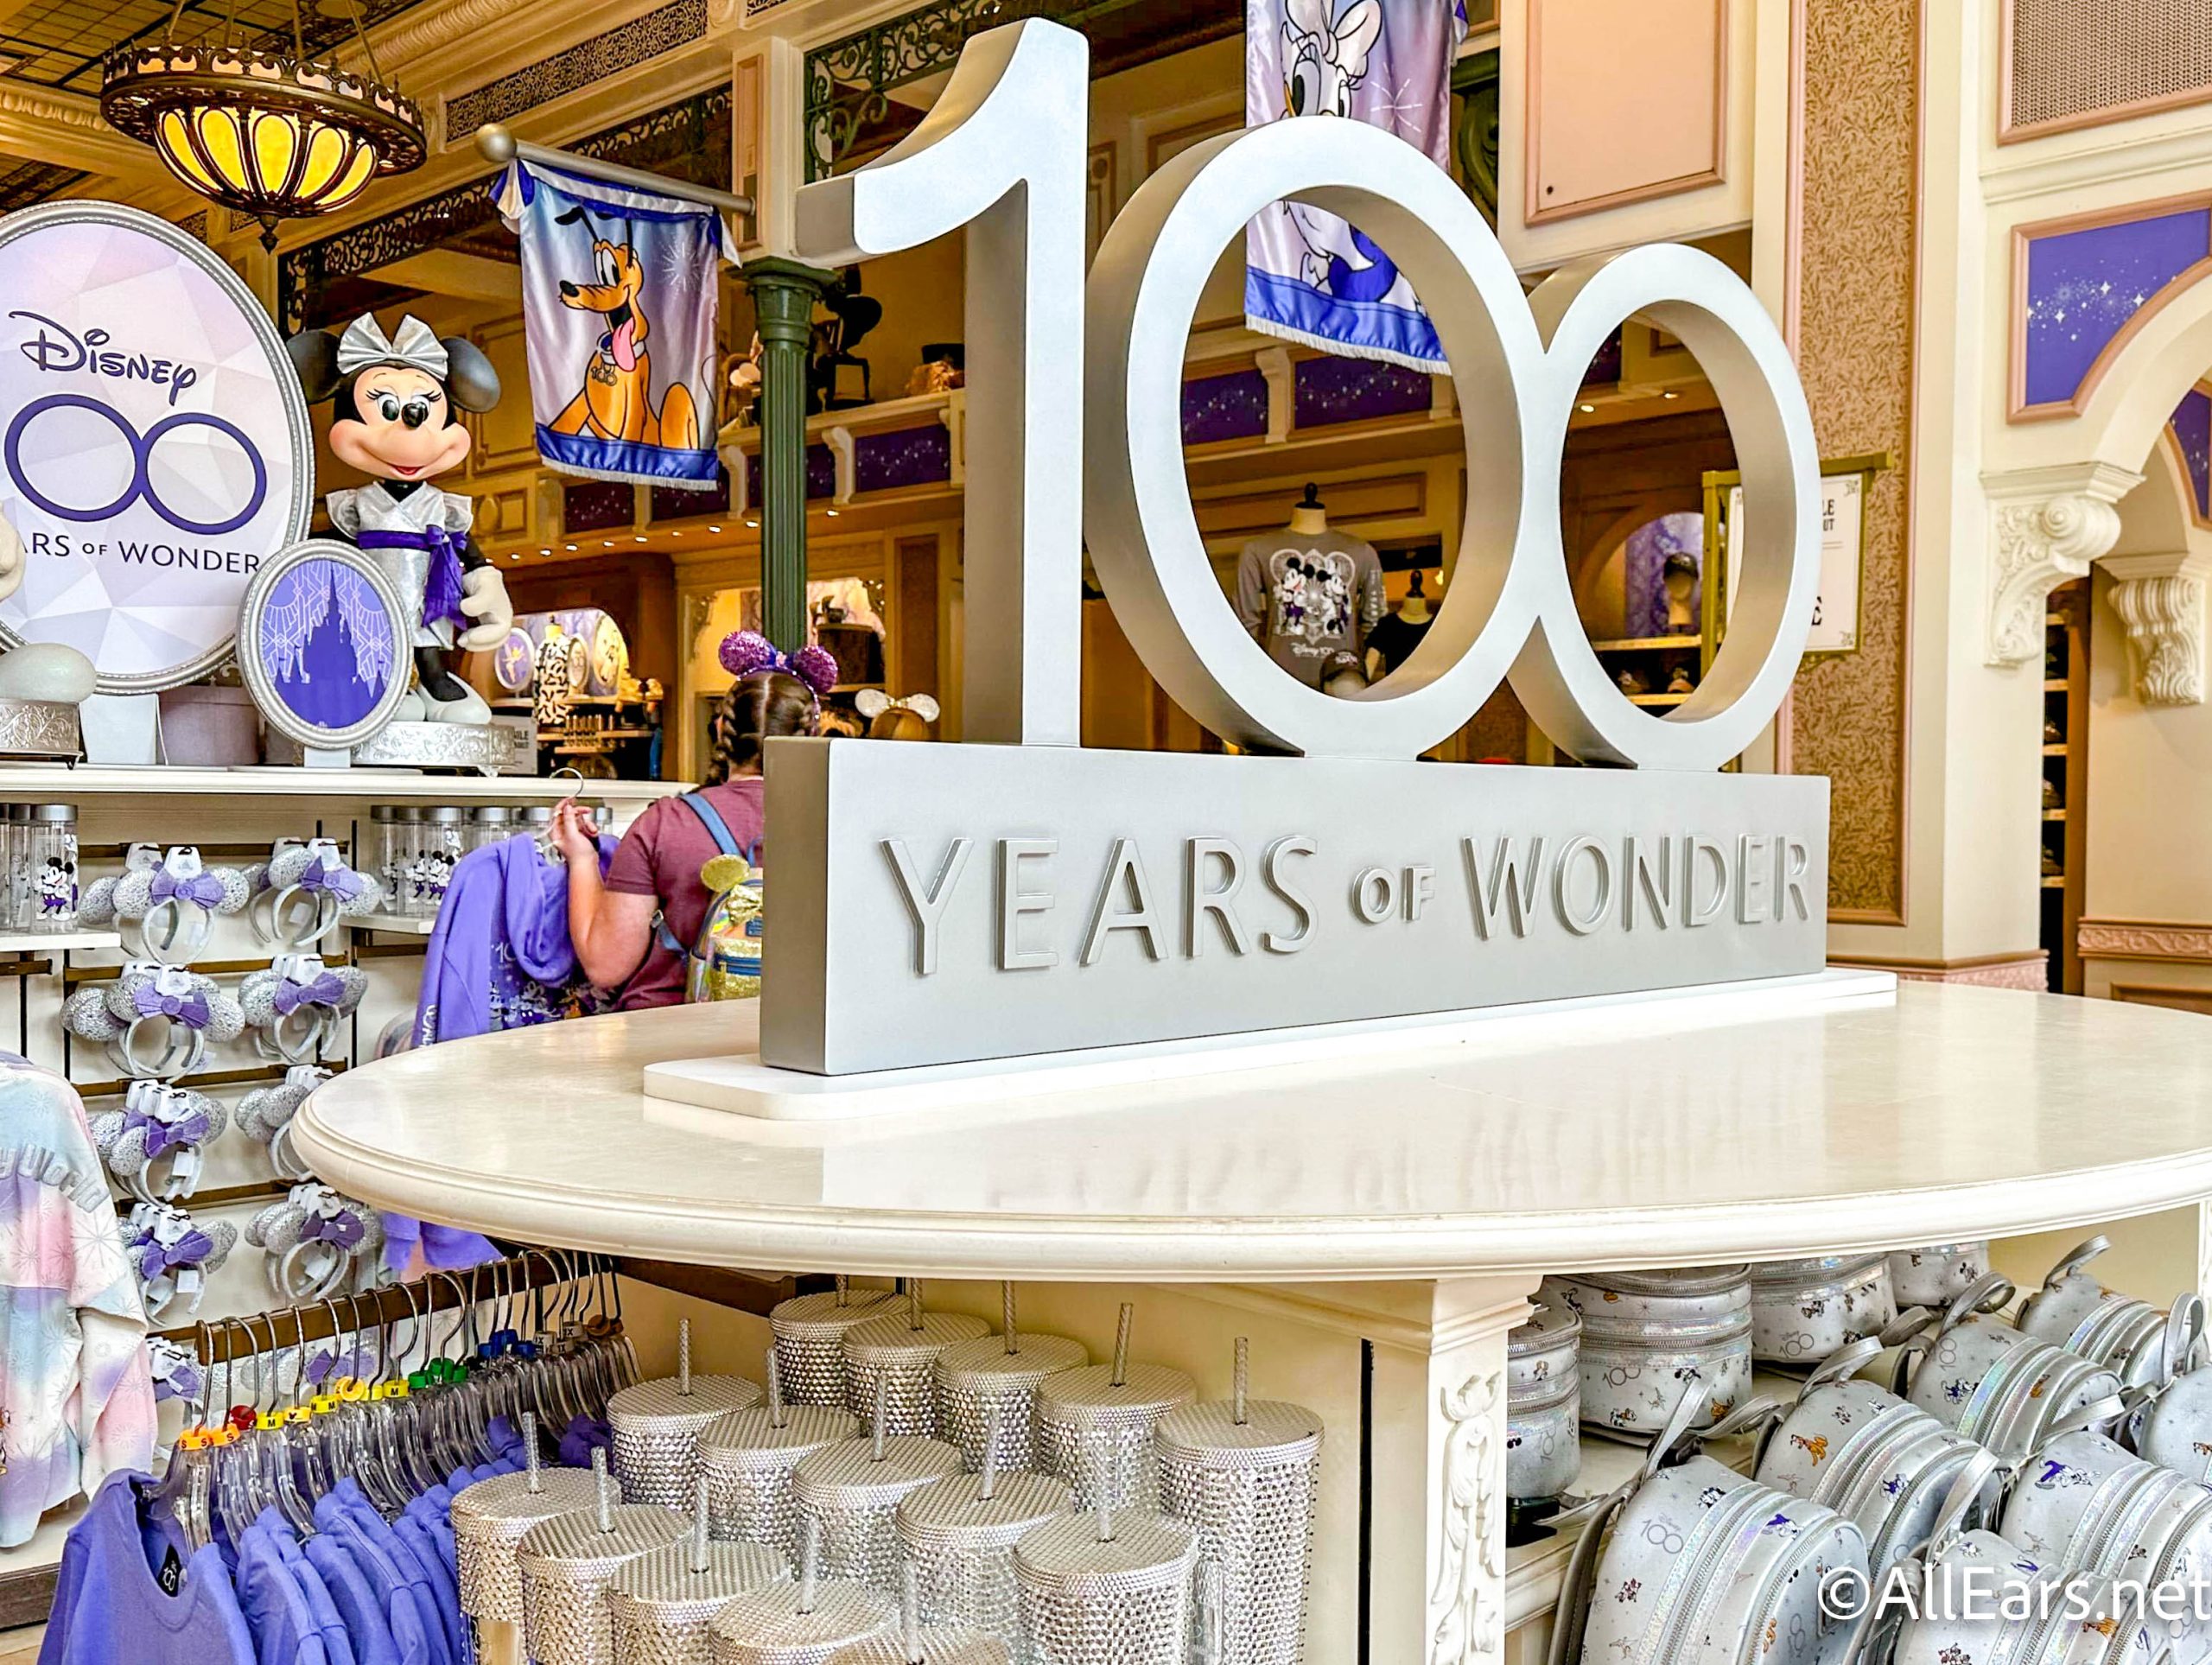 Only Disney World Souvenirs That Are Worth It, From Former Cast Member